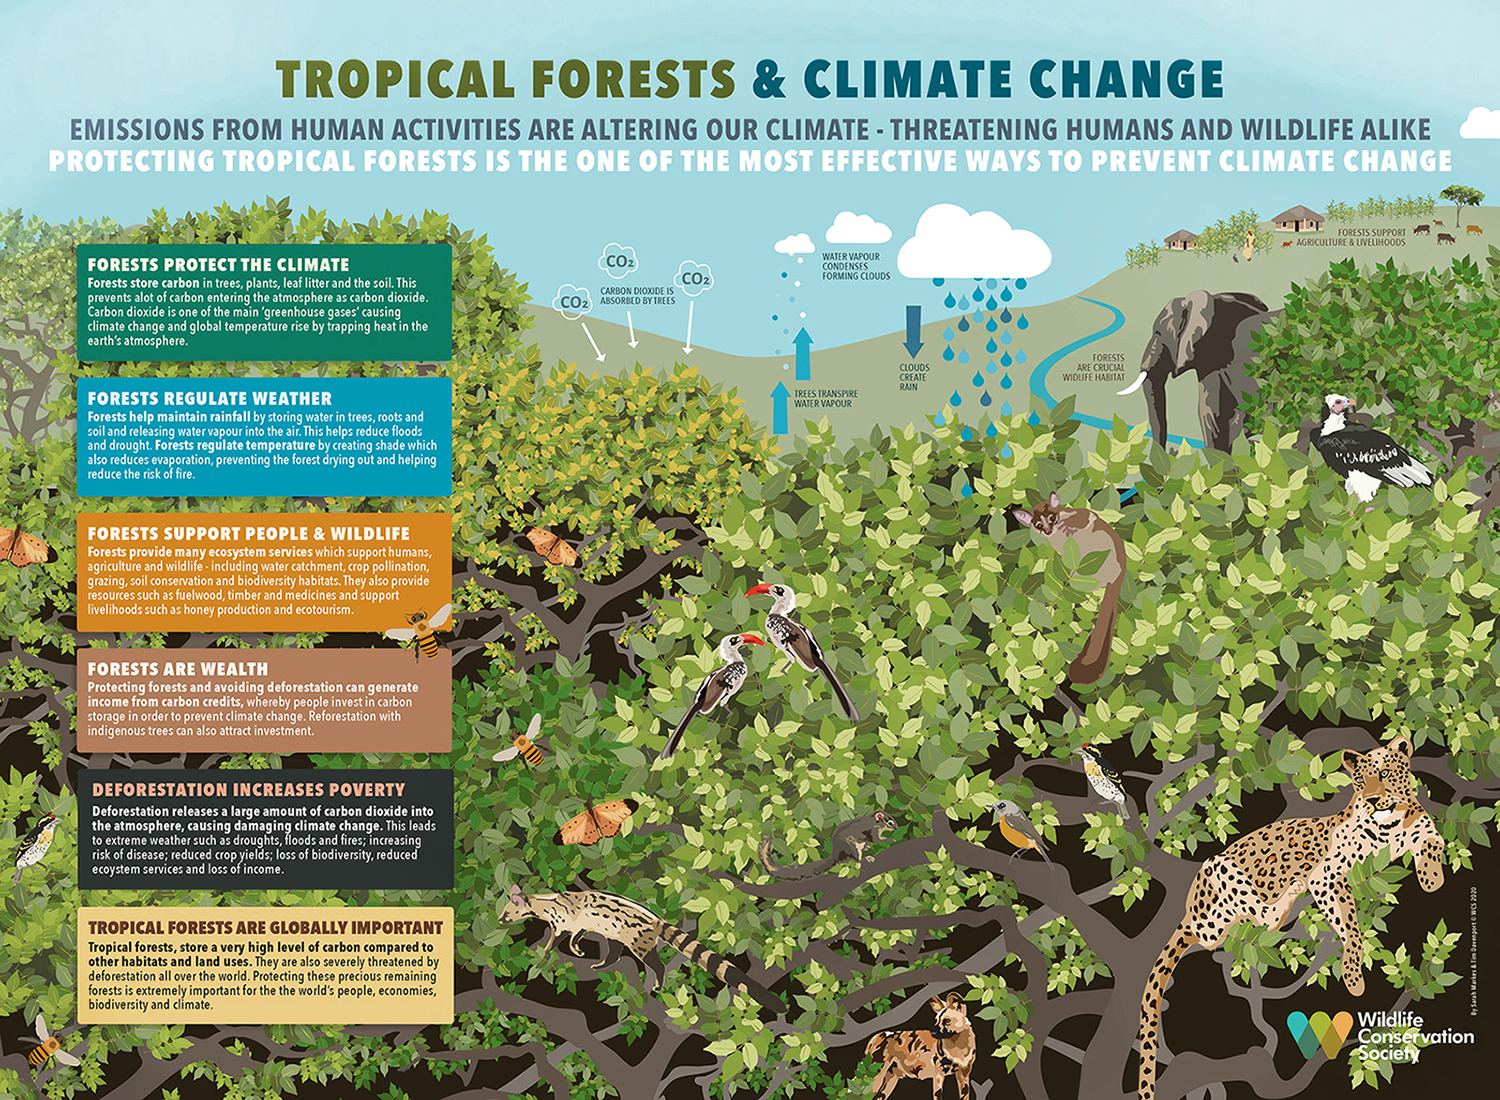 Protecting Tropical Forests Protects Us